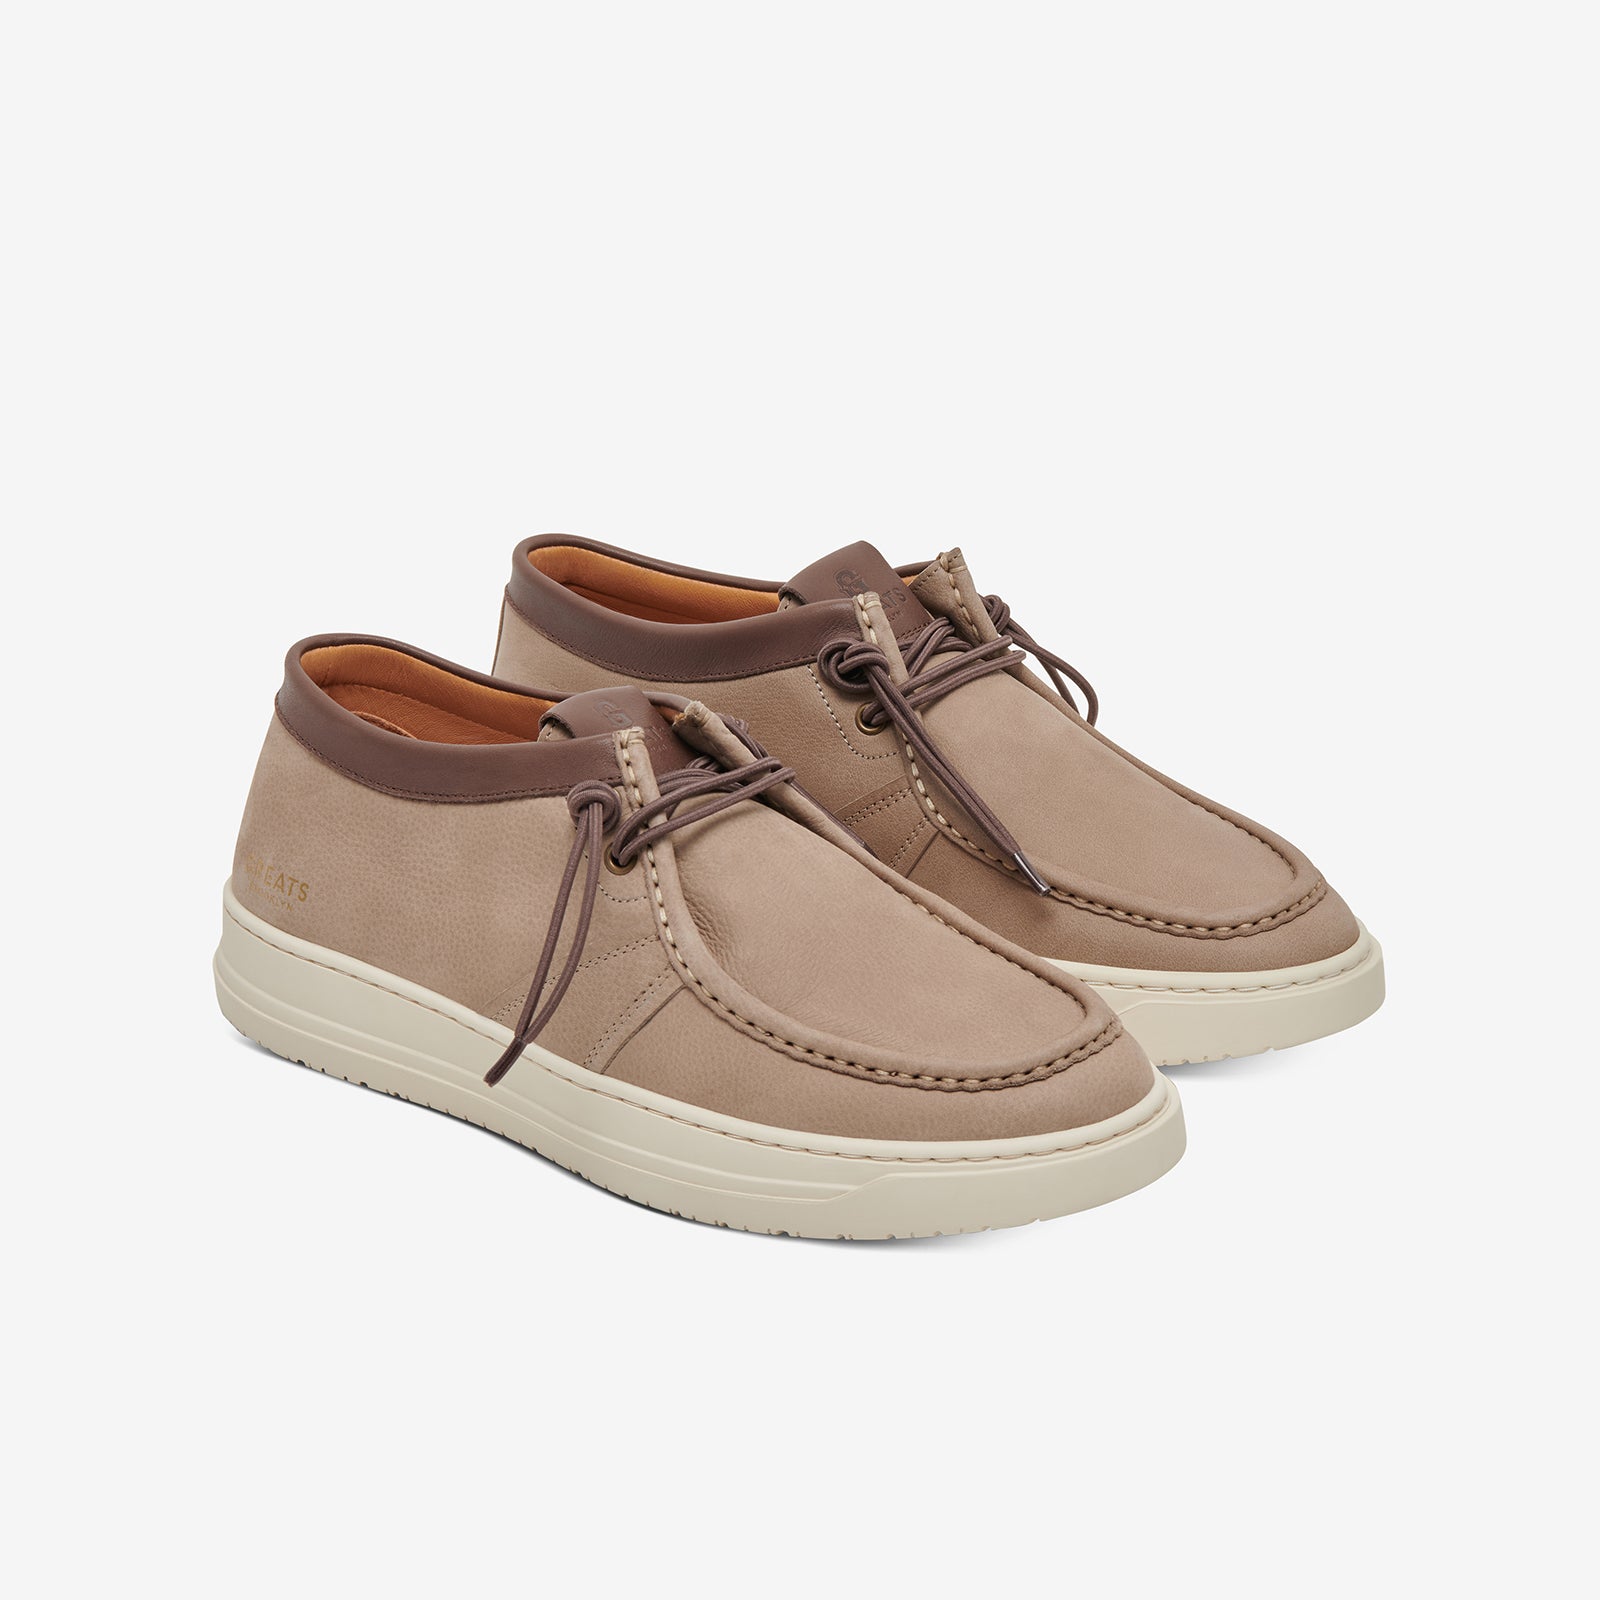 Greats - The Wallace Wallabee - Light Taupe - Men's Shoe – GREATS